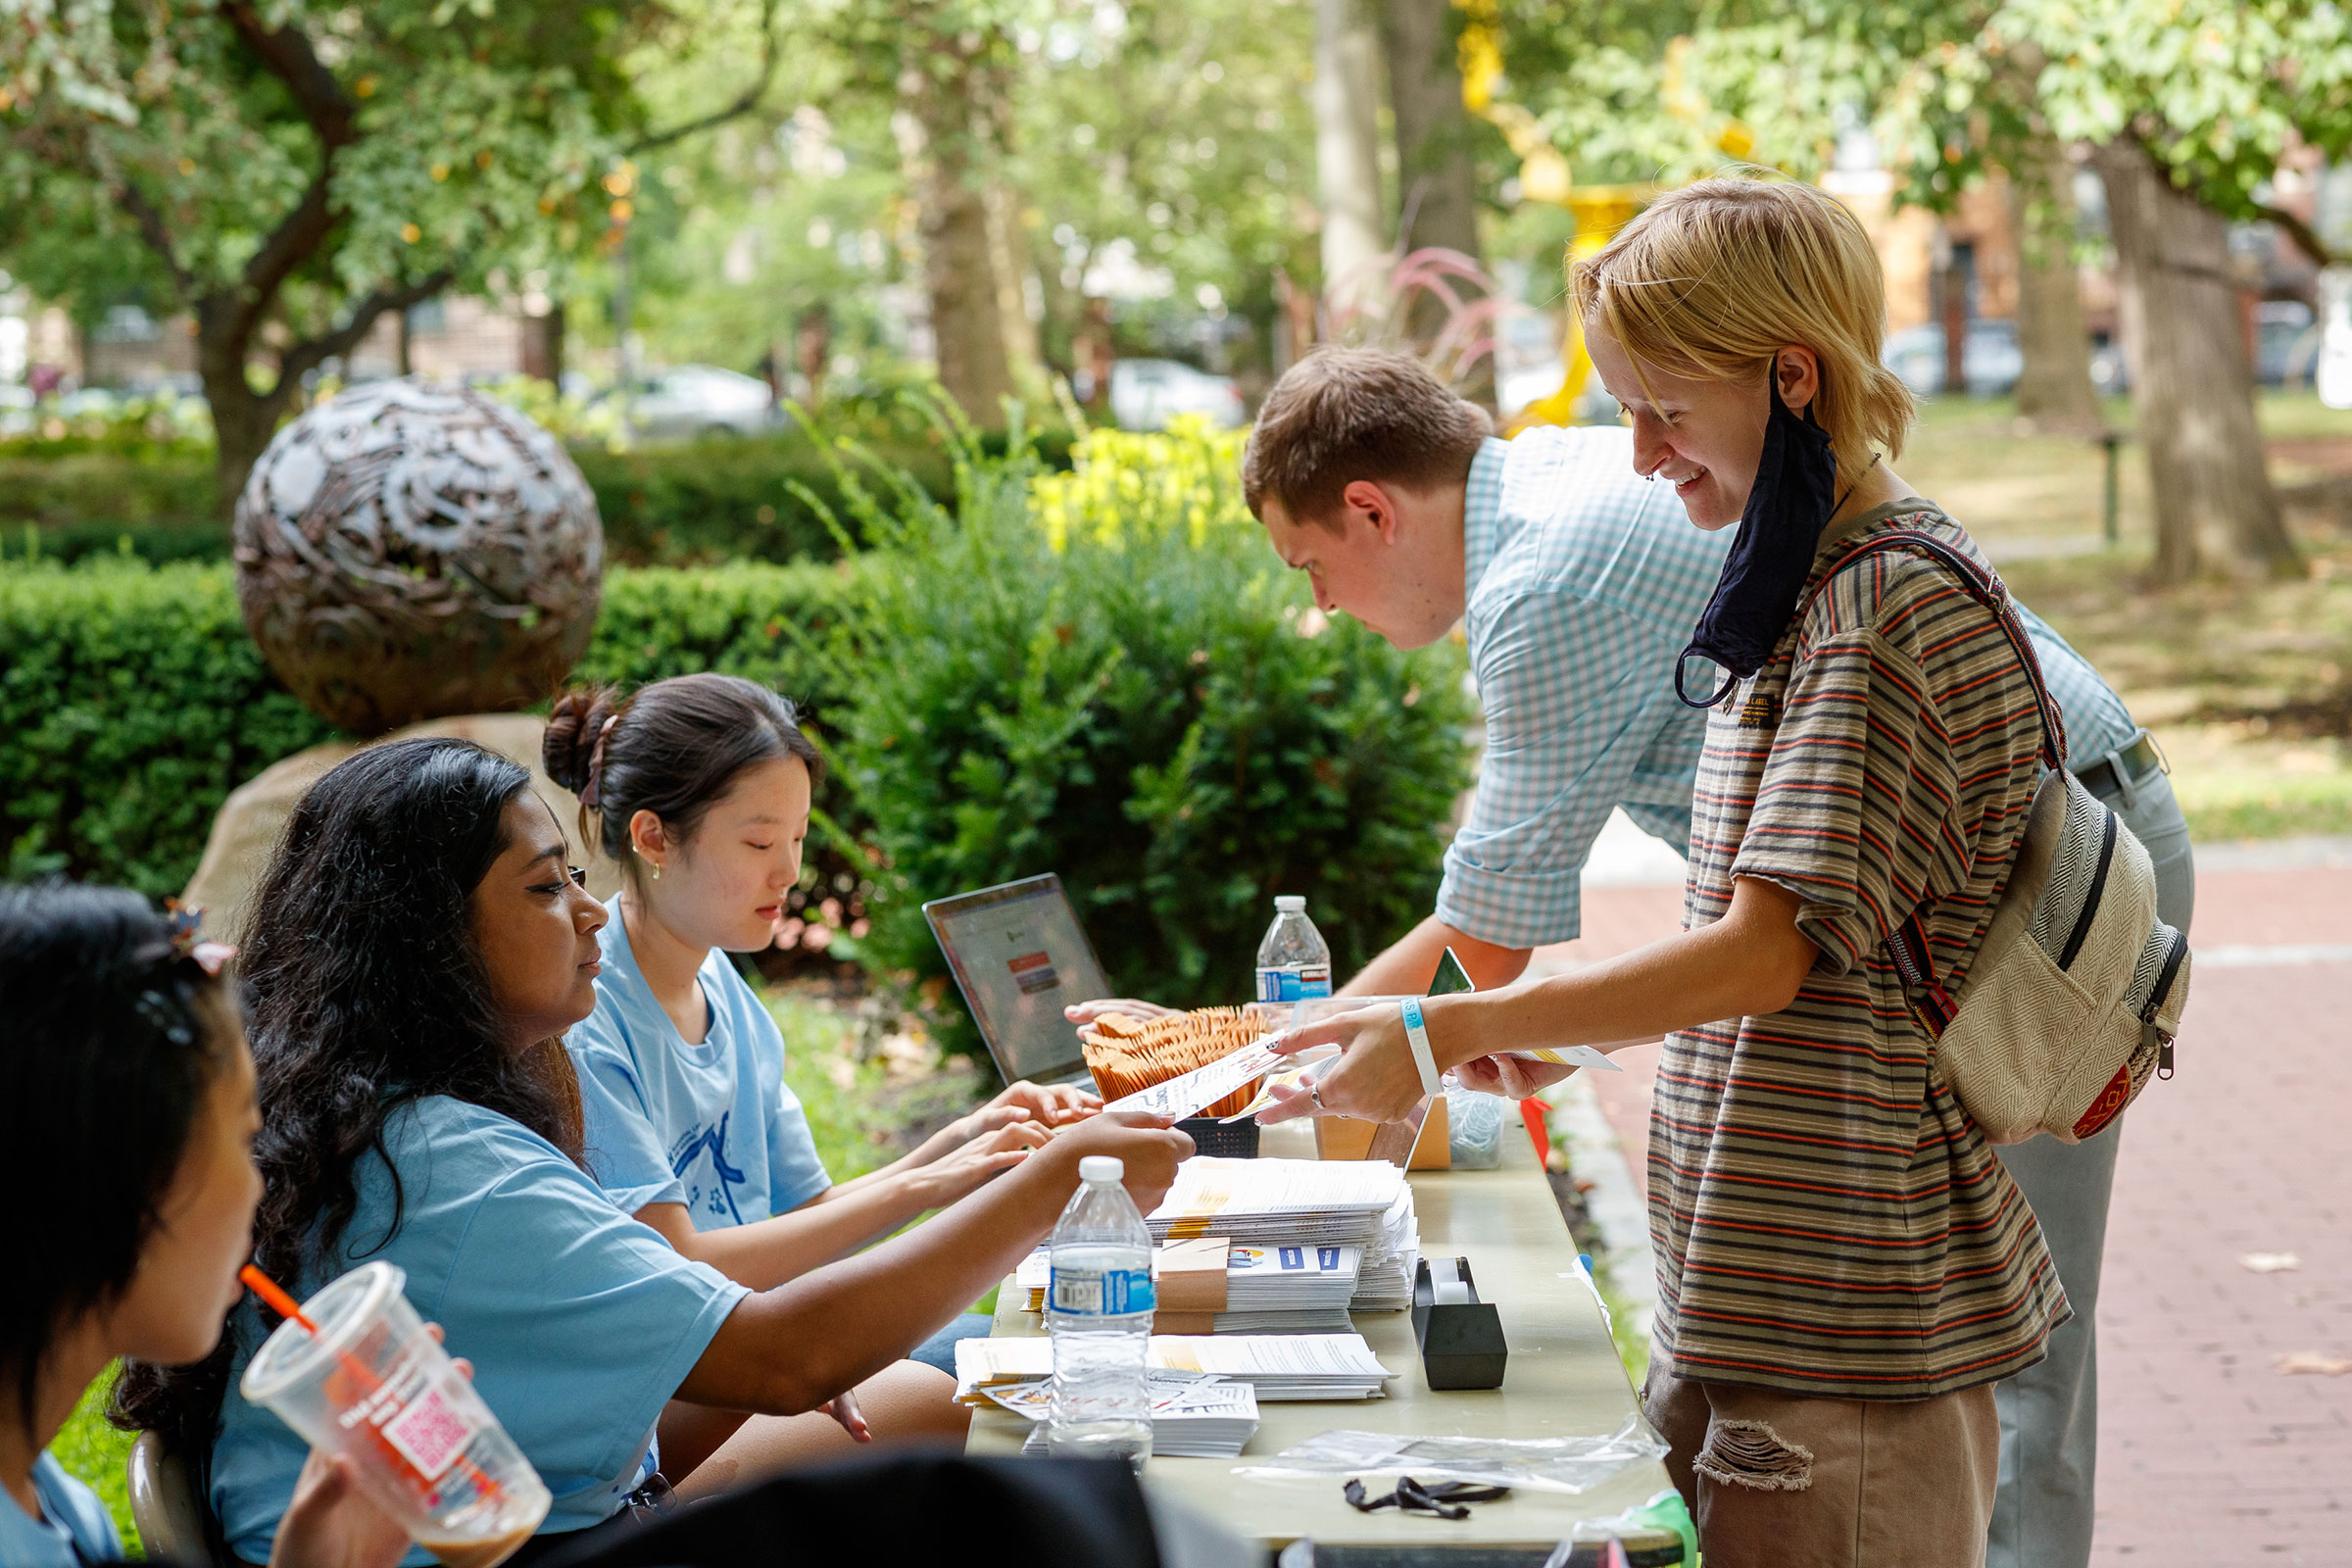 Two students are greeted by orientation staff at a long table on campus.